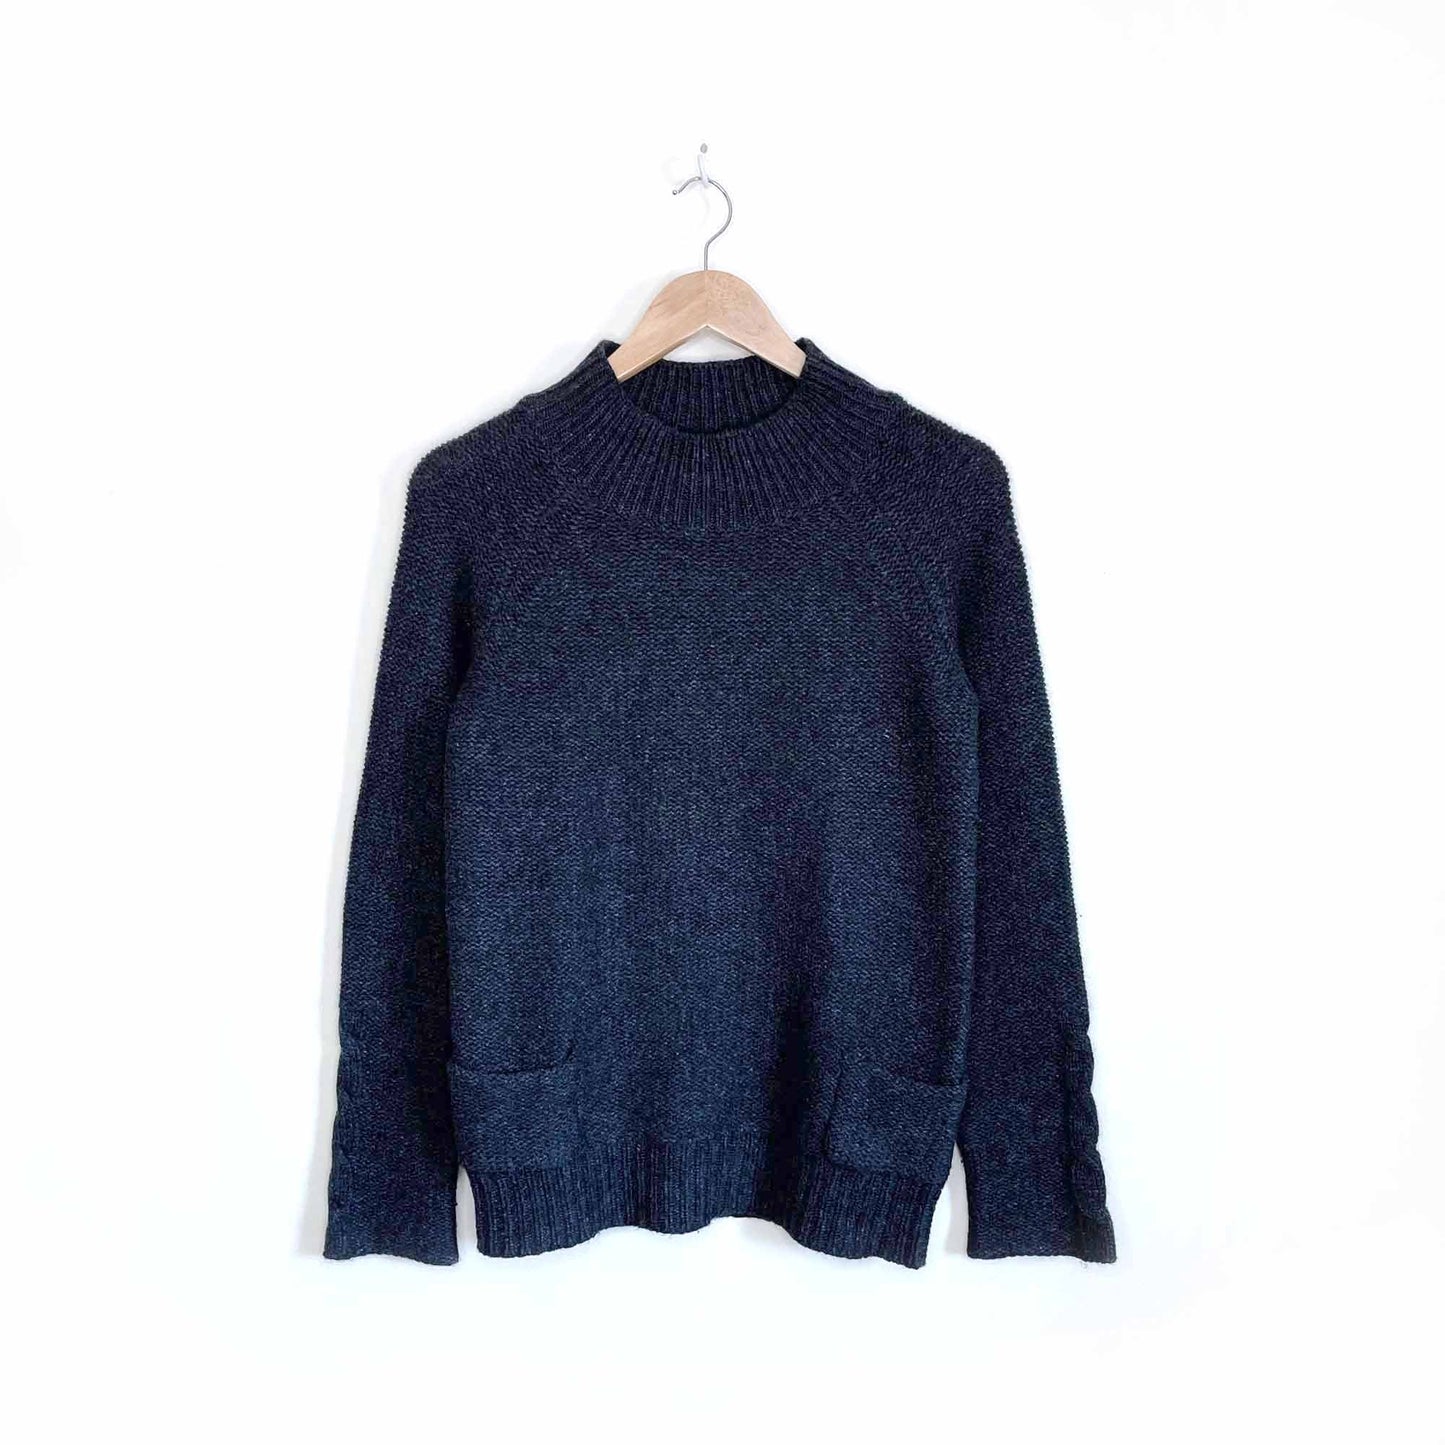 closed the original product 100% cashmere sweater - size small